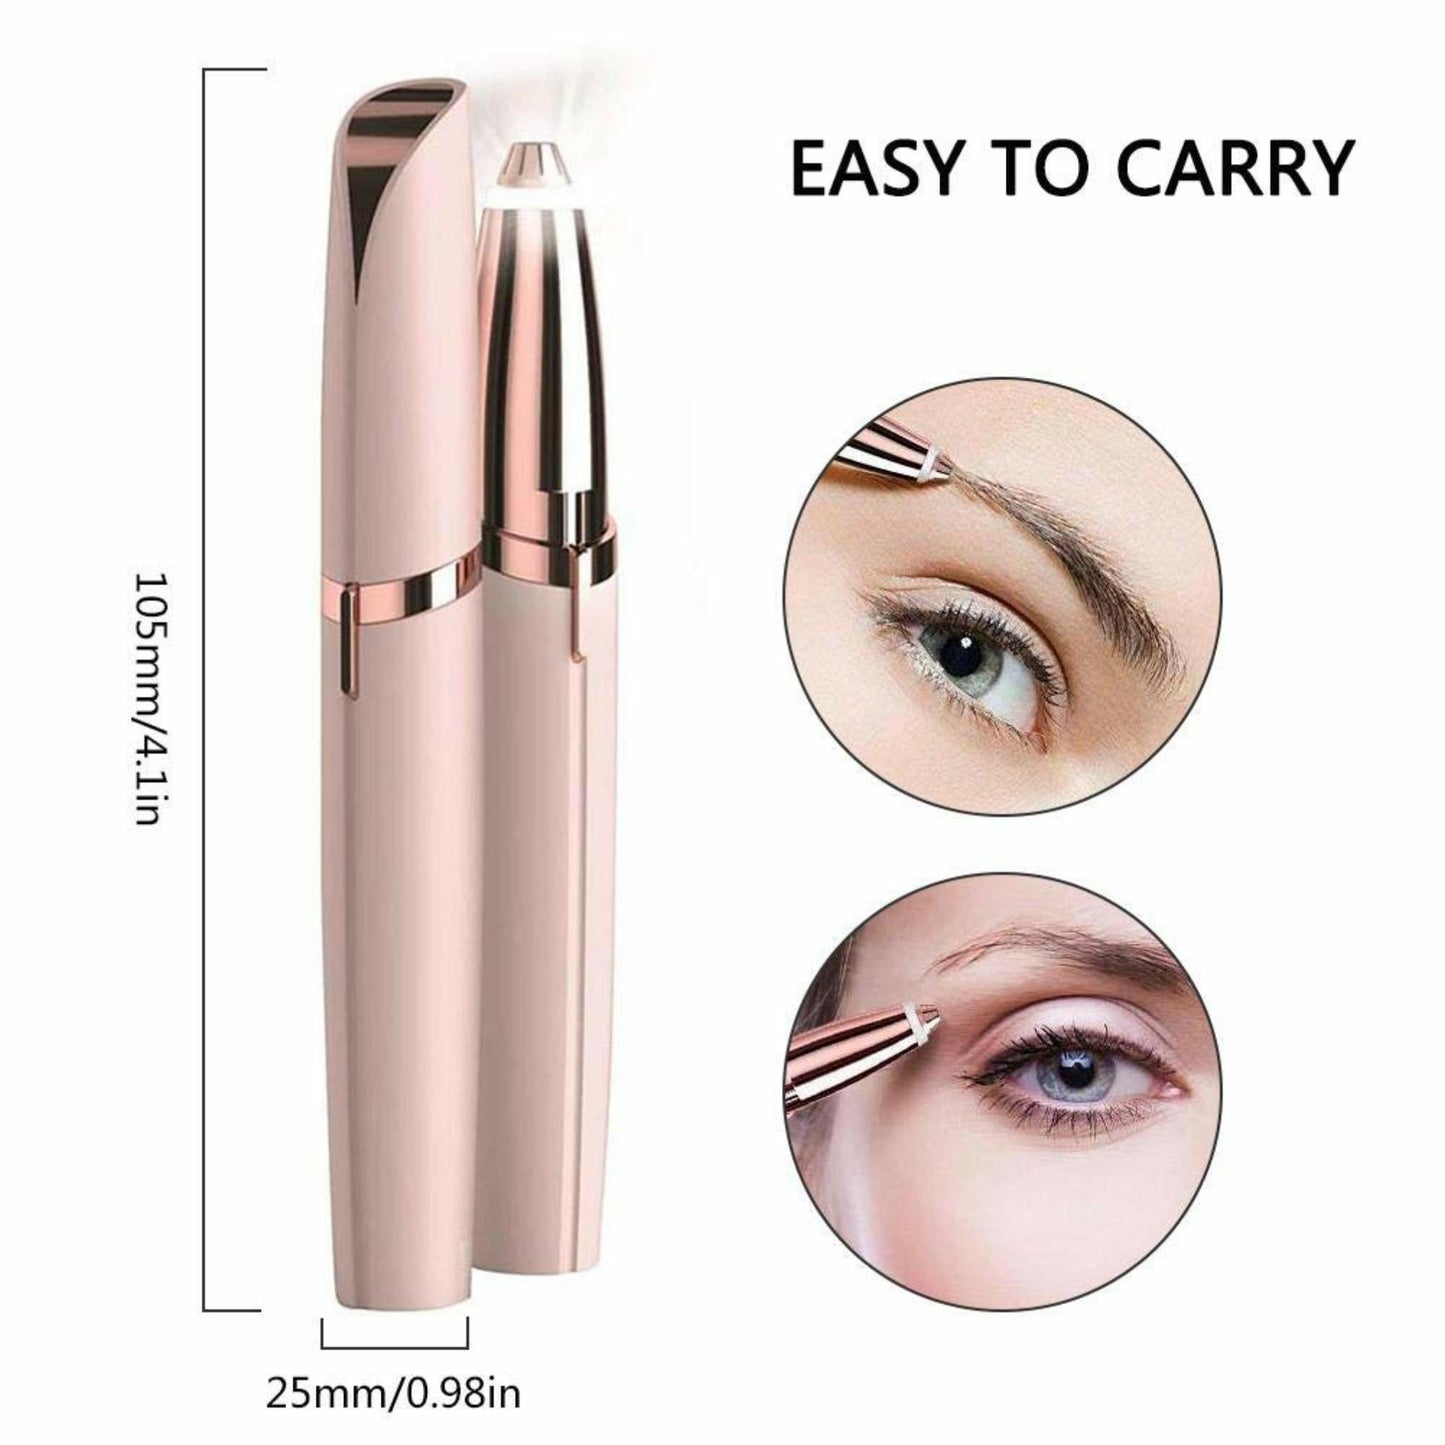 GW-FLAWLESS BROWS - GET PERFECT EYEBROWS IN 5 MINUTES! - shopgiftsworld